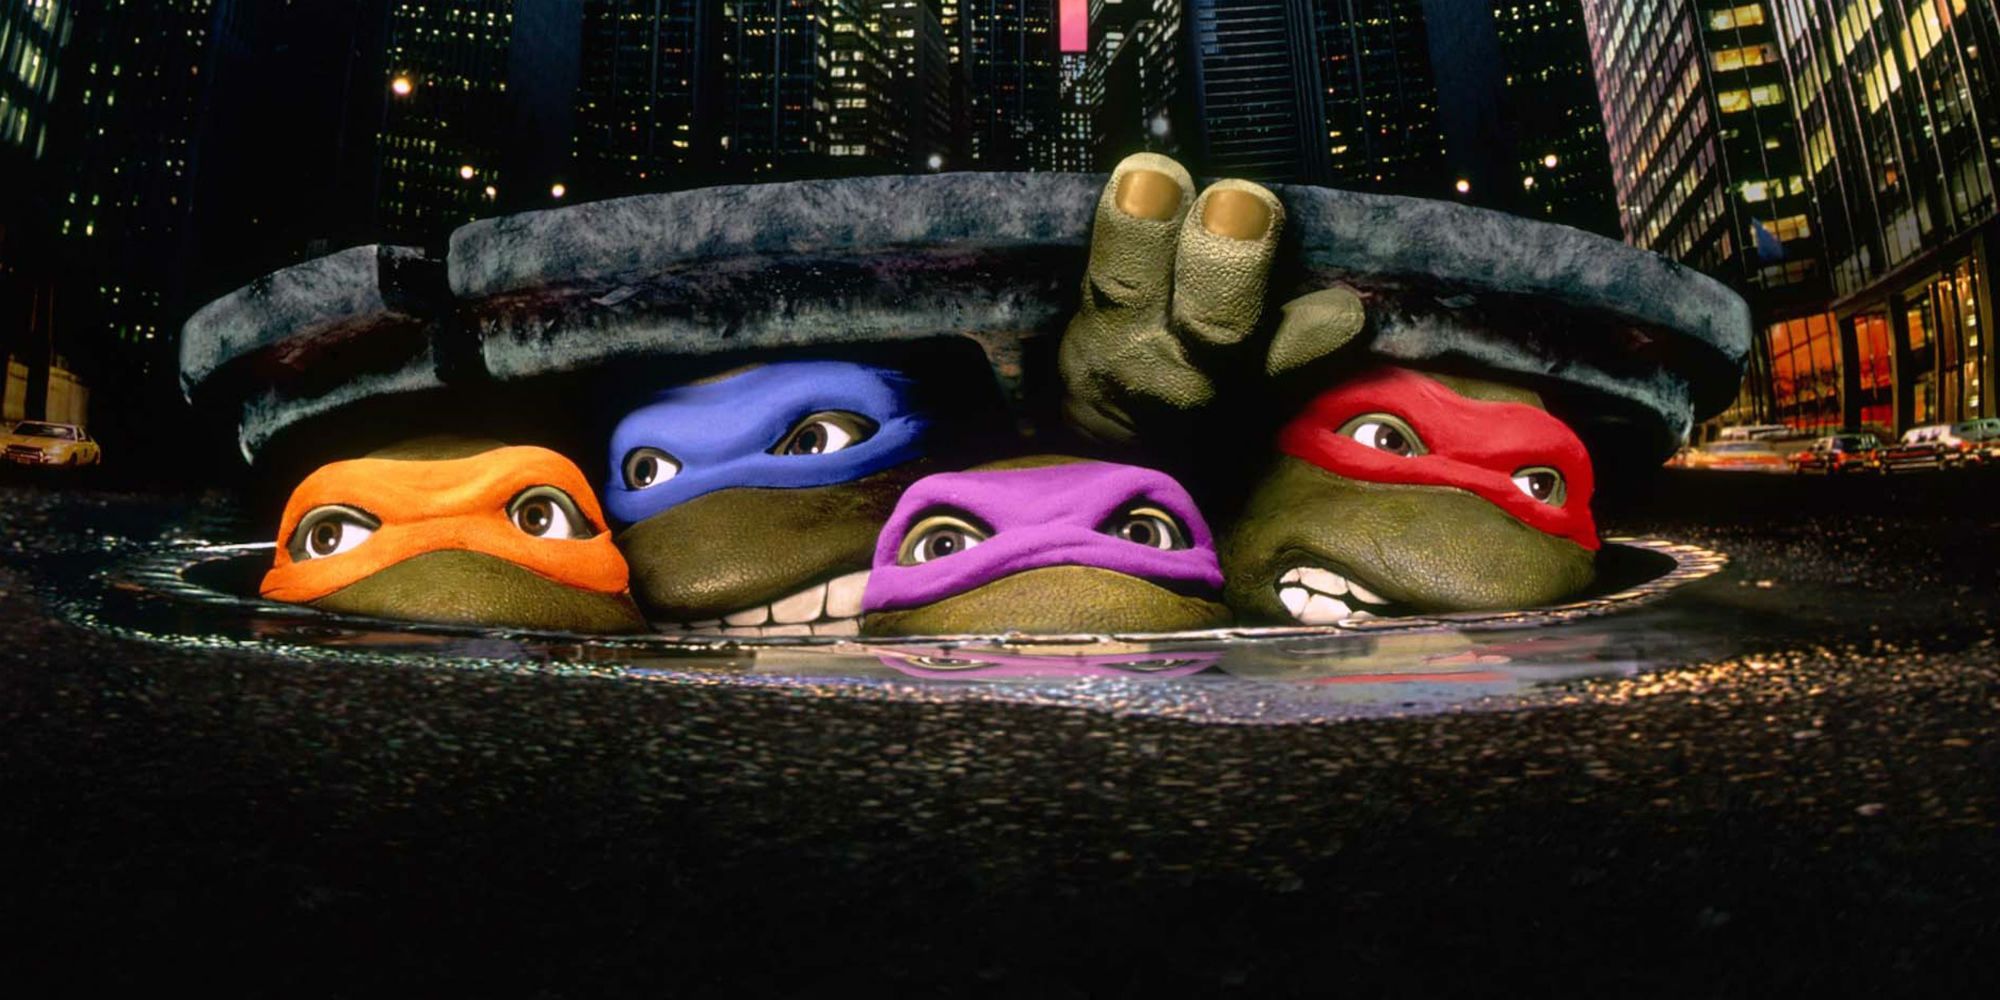 Teenage Mutant Ninja Turtles 1990 movie original poster of the turtles looking out of the sewer, cropped